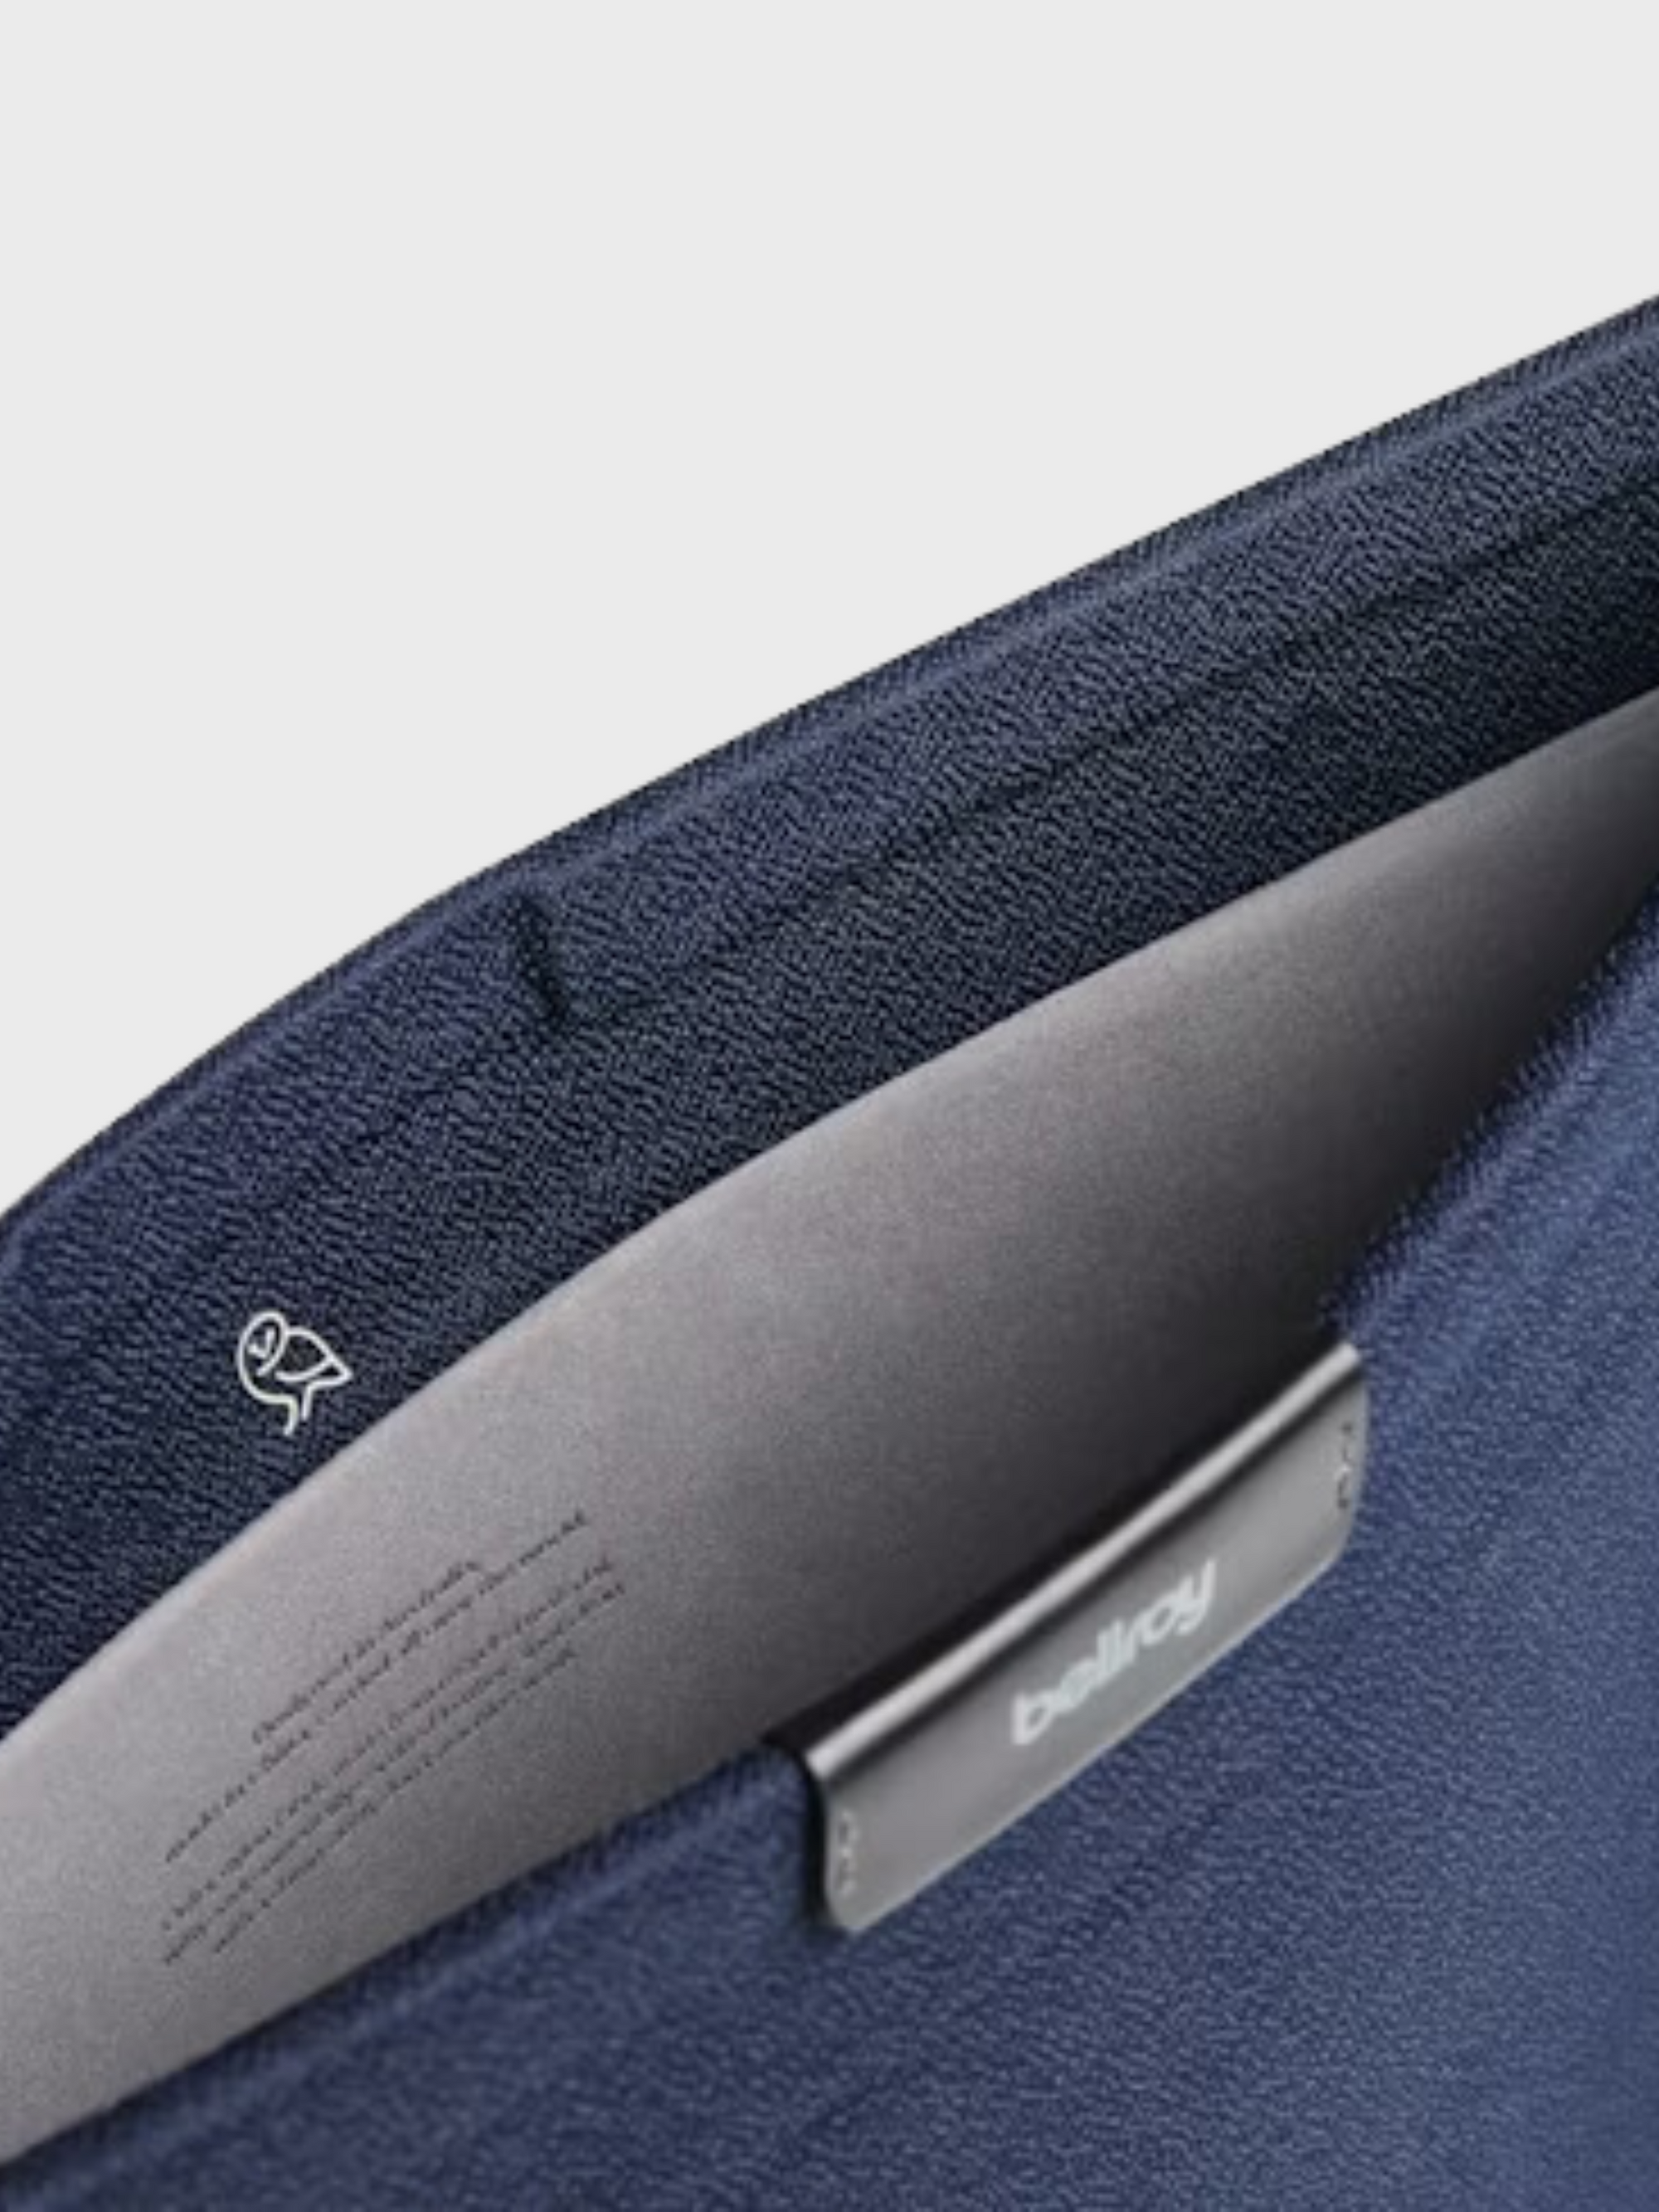 Bellroy Laptop Sleeve 14in Navy SS24-Men&#39;s Accessories-Brooklyn-Vancouver-Yaletown-Canada